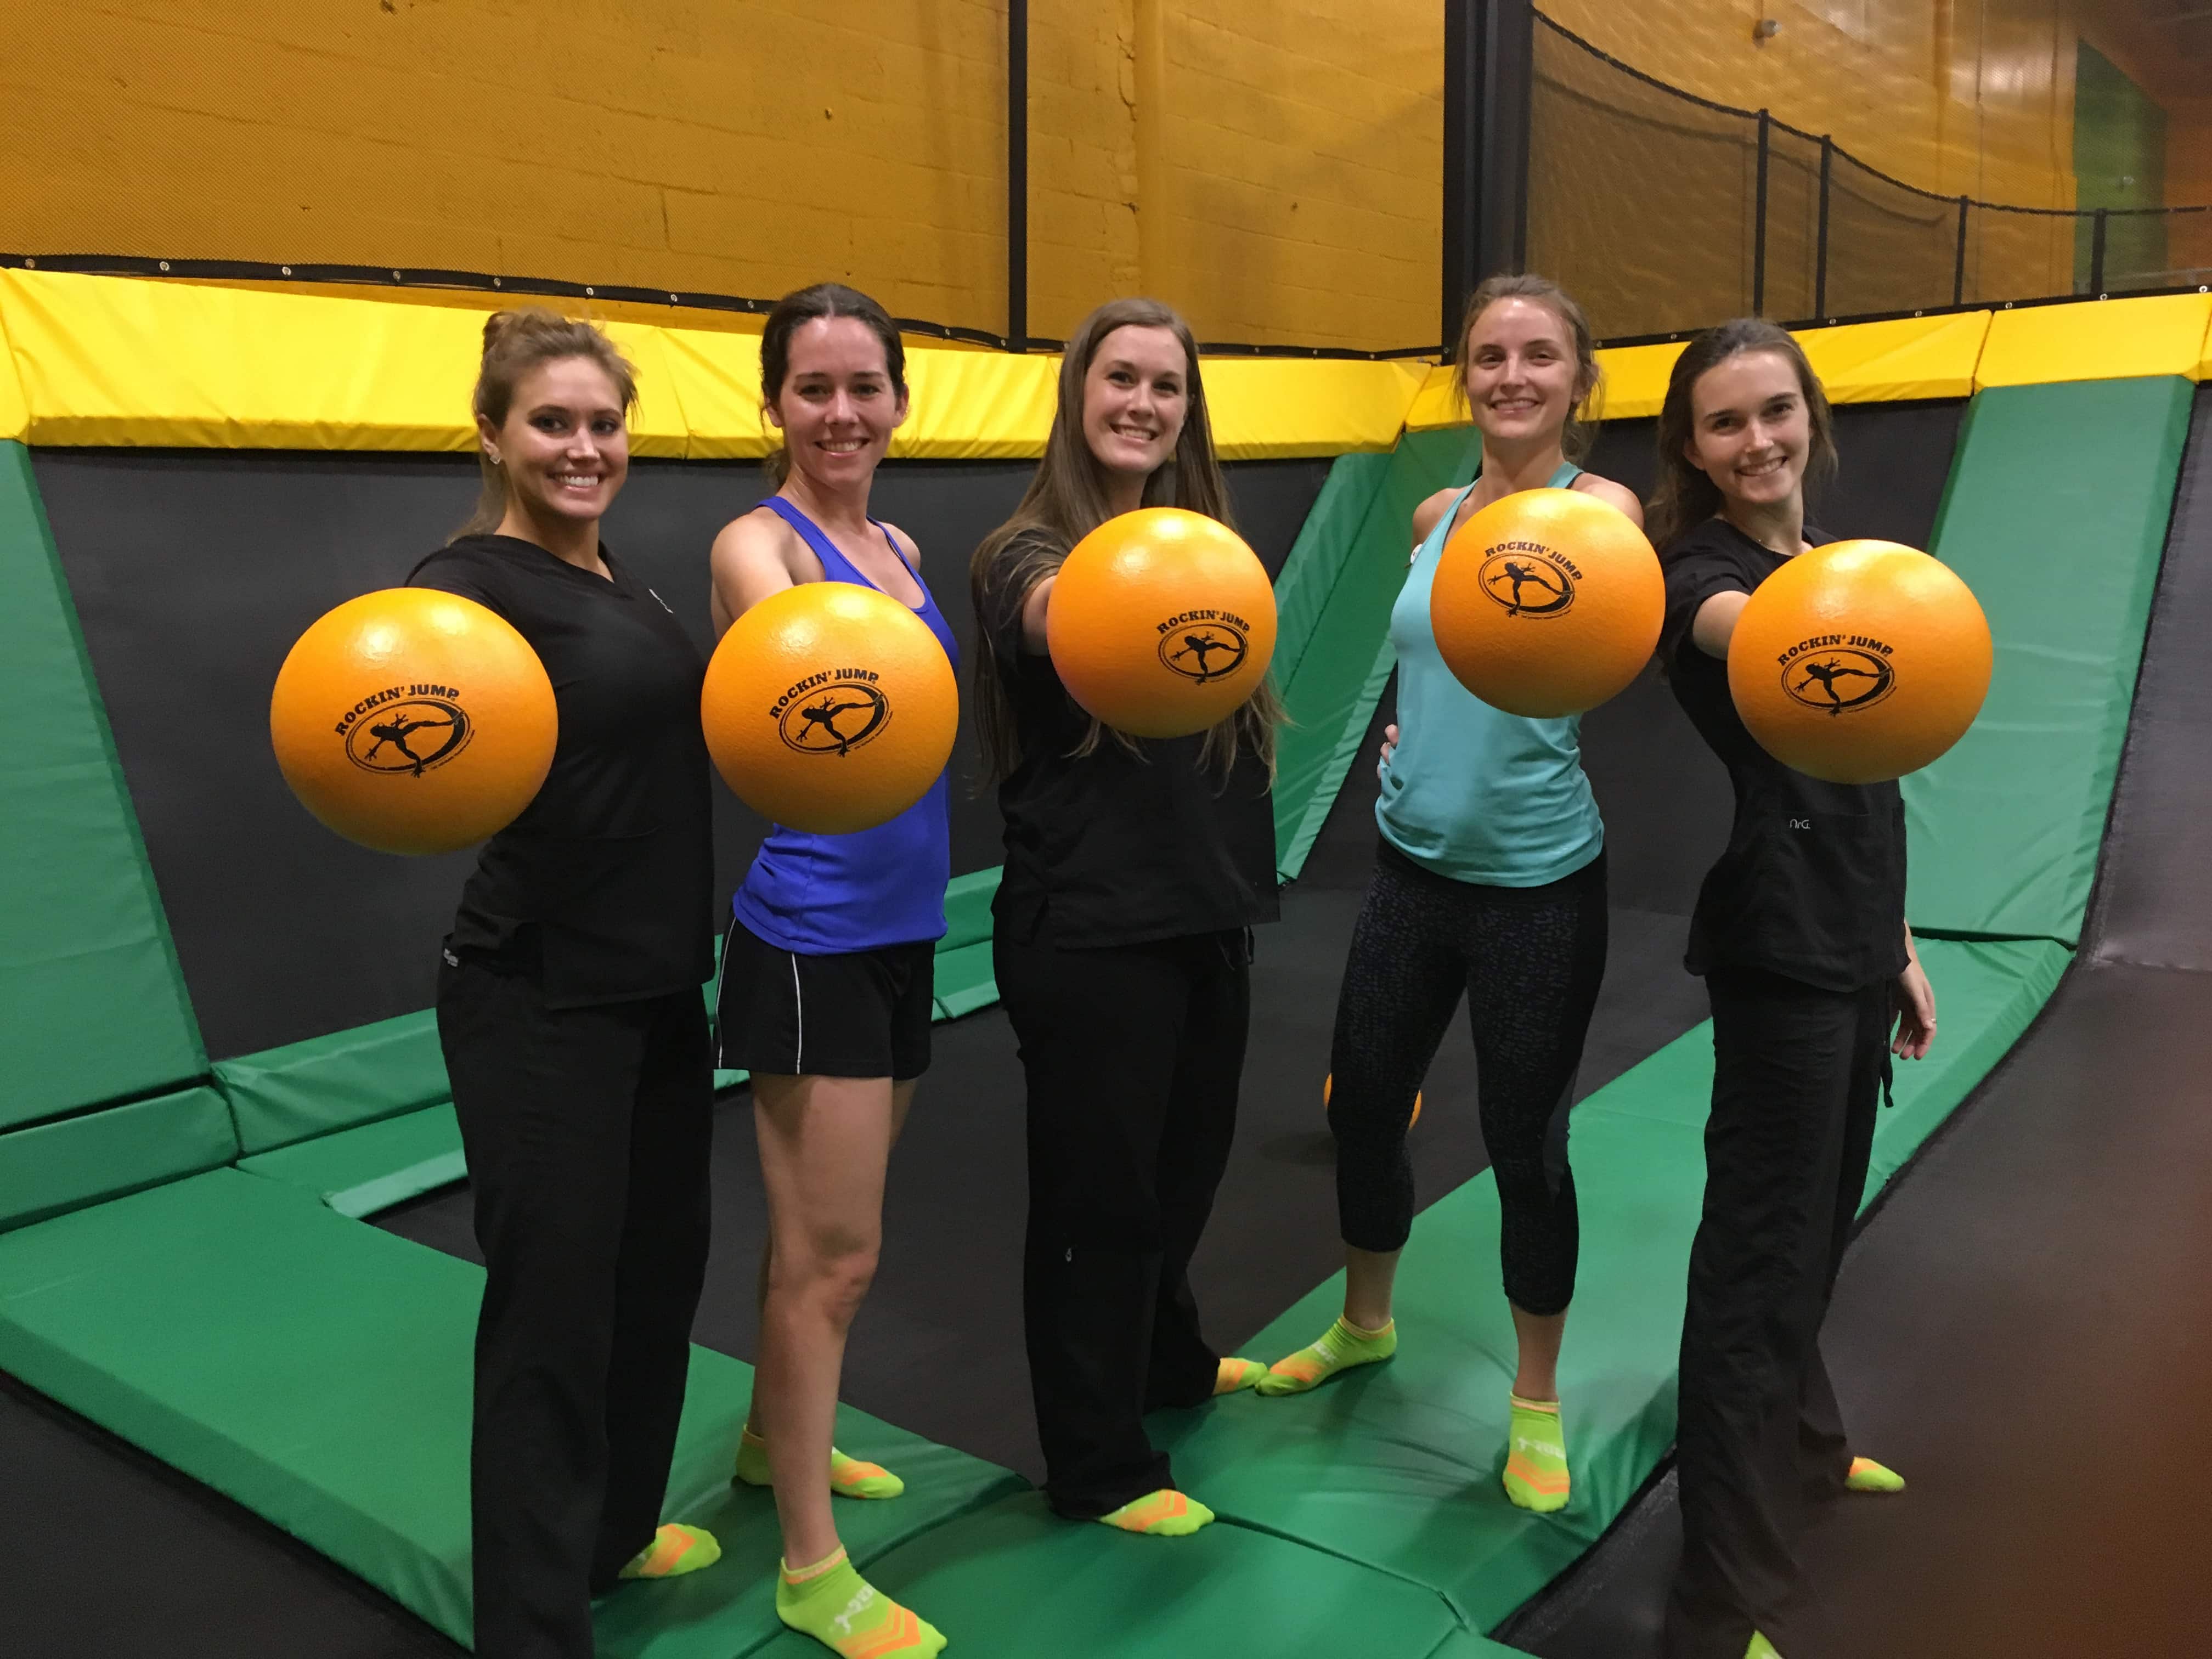 The Physician Assistant Student Association Hosts a Dodgeball Fundraiser